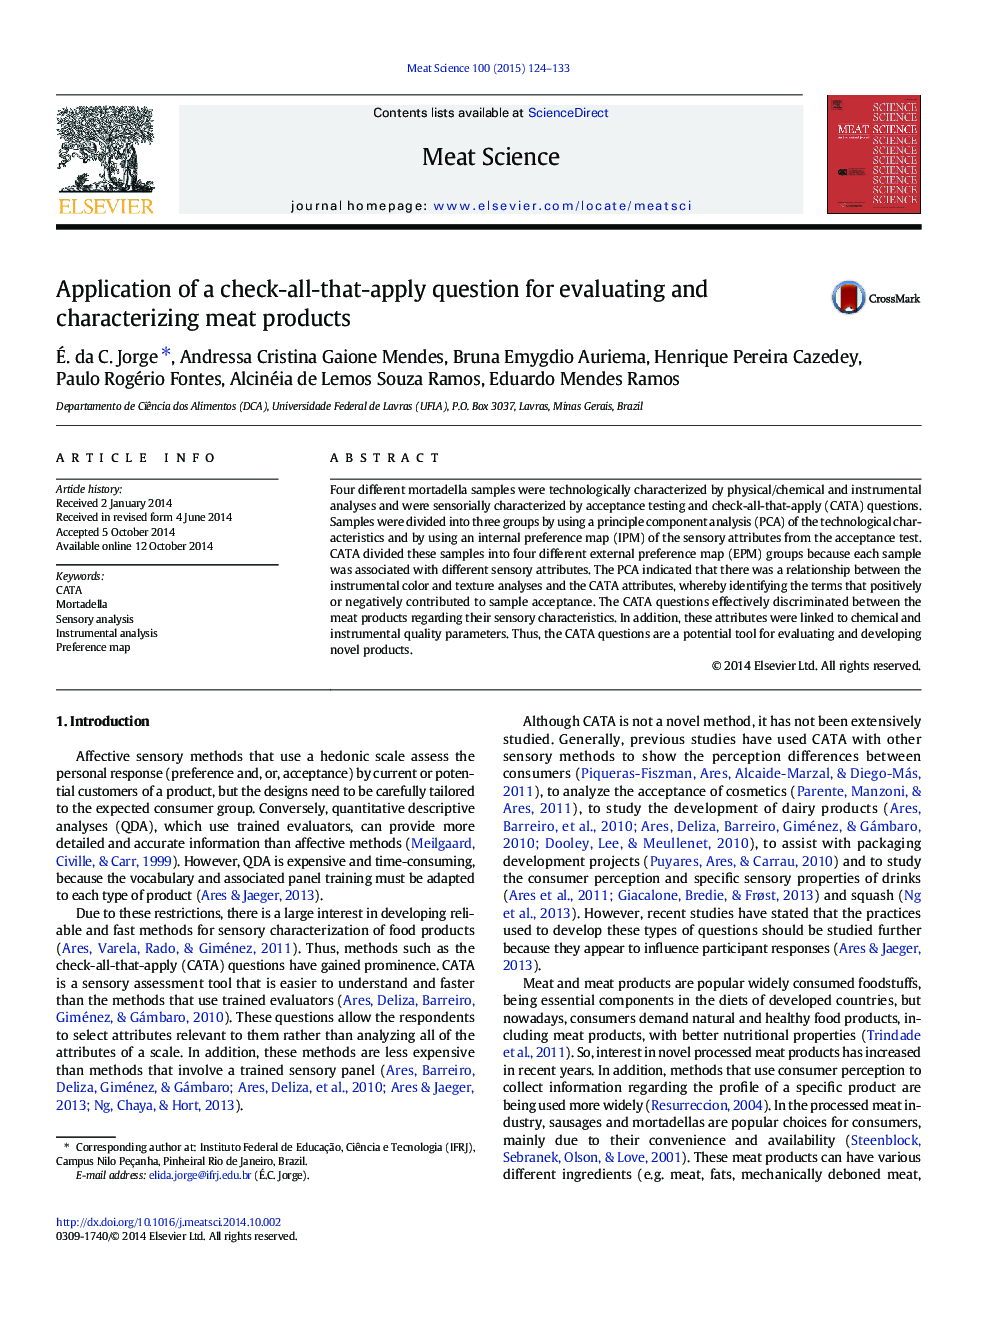 Application of a check-all-that-apply question for evaluating and characterizing meat products